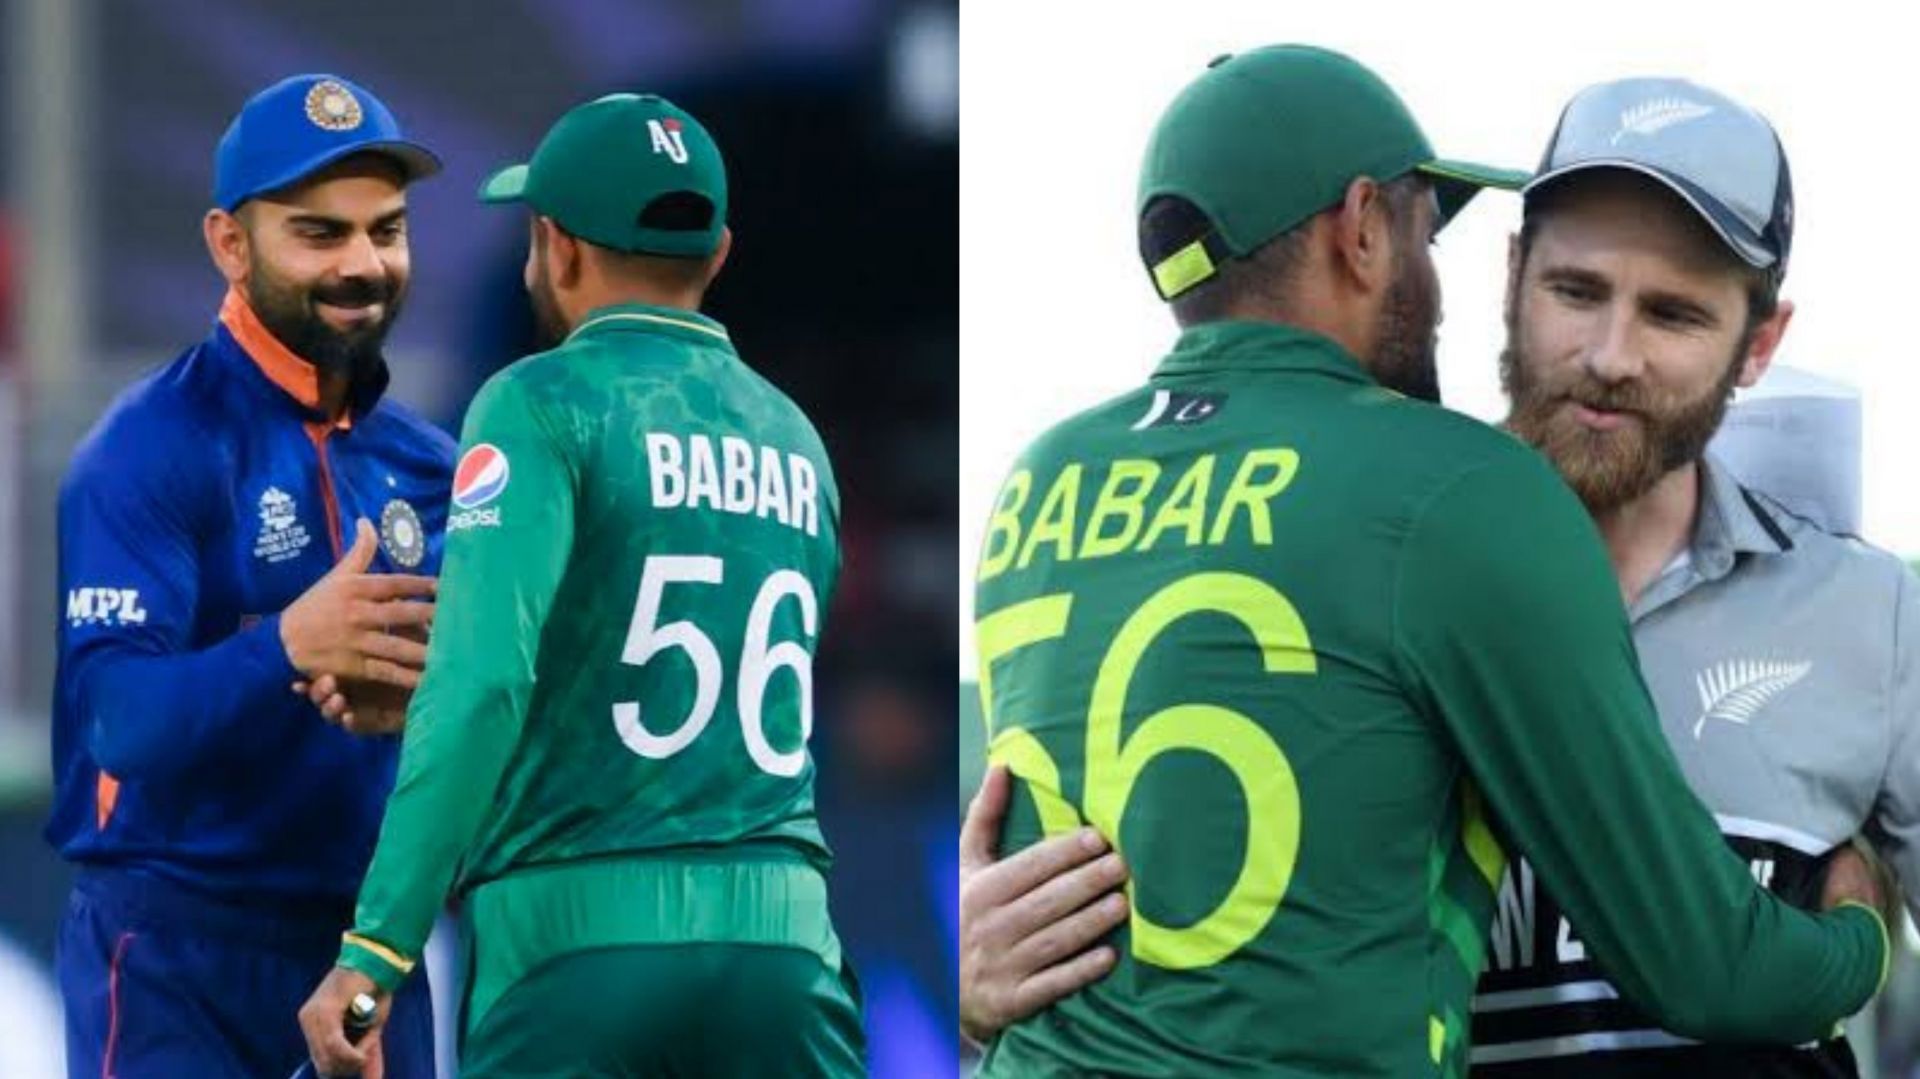 Babar Azam expressed his support to Kane Williamson and Virat Kohli in their tough times